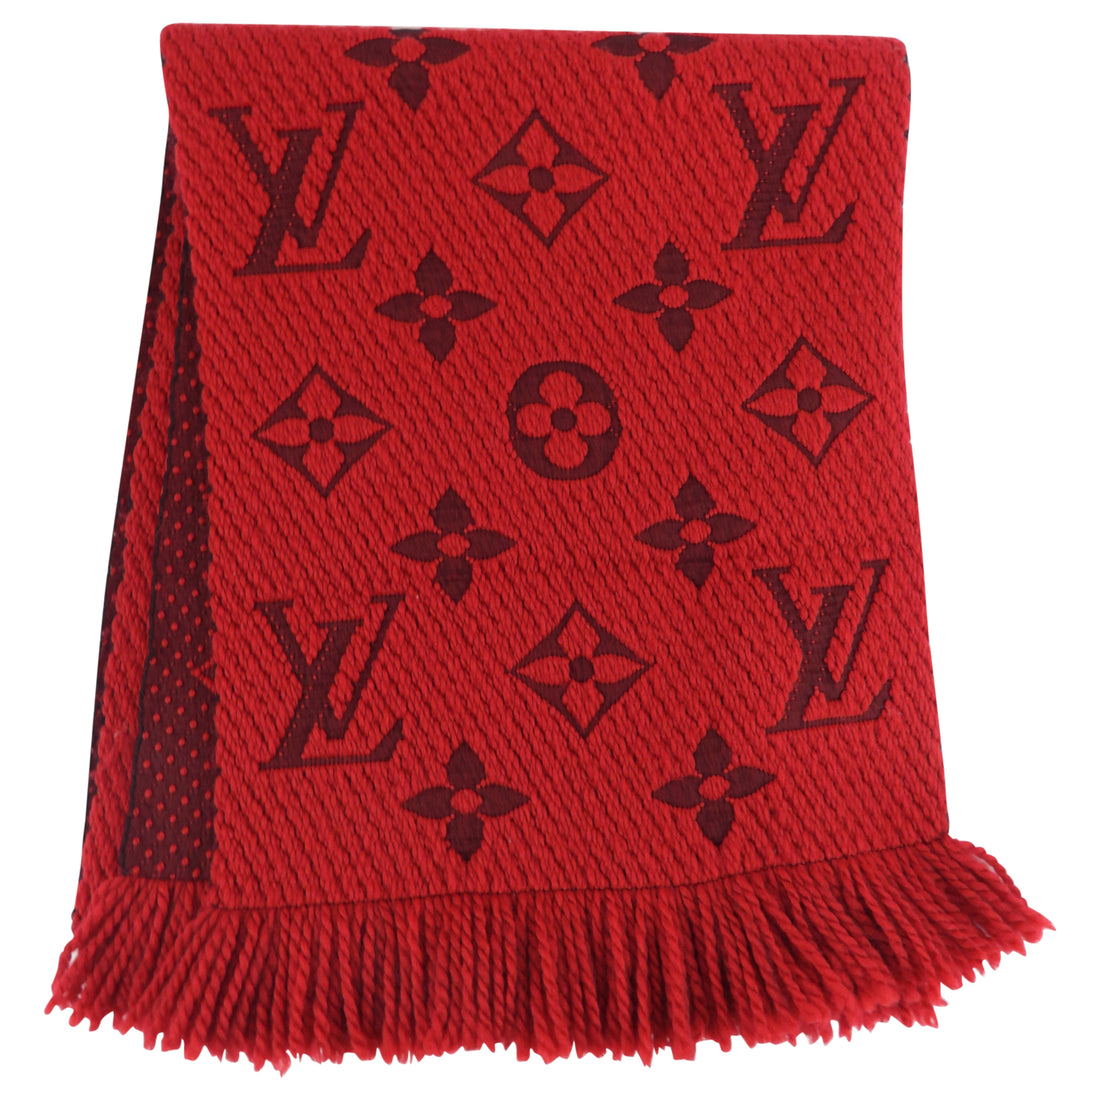 vuitton scarf and